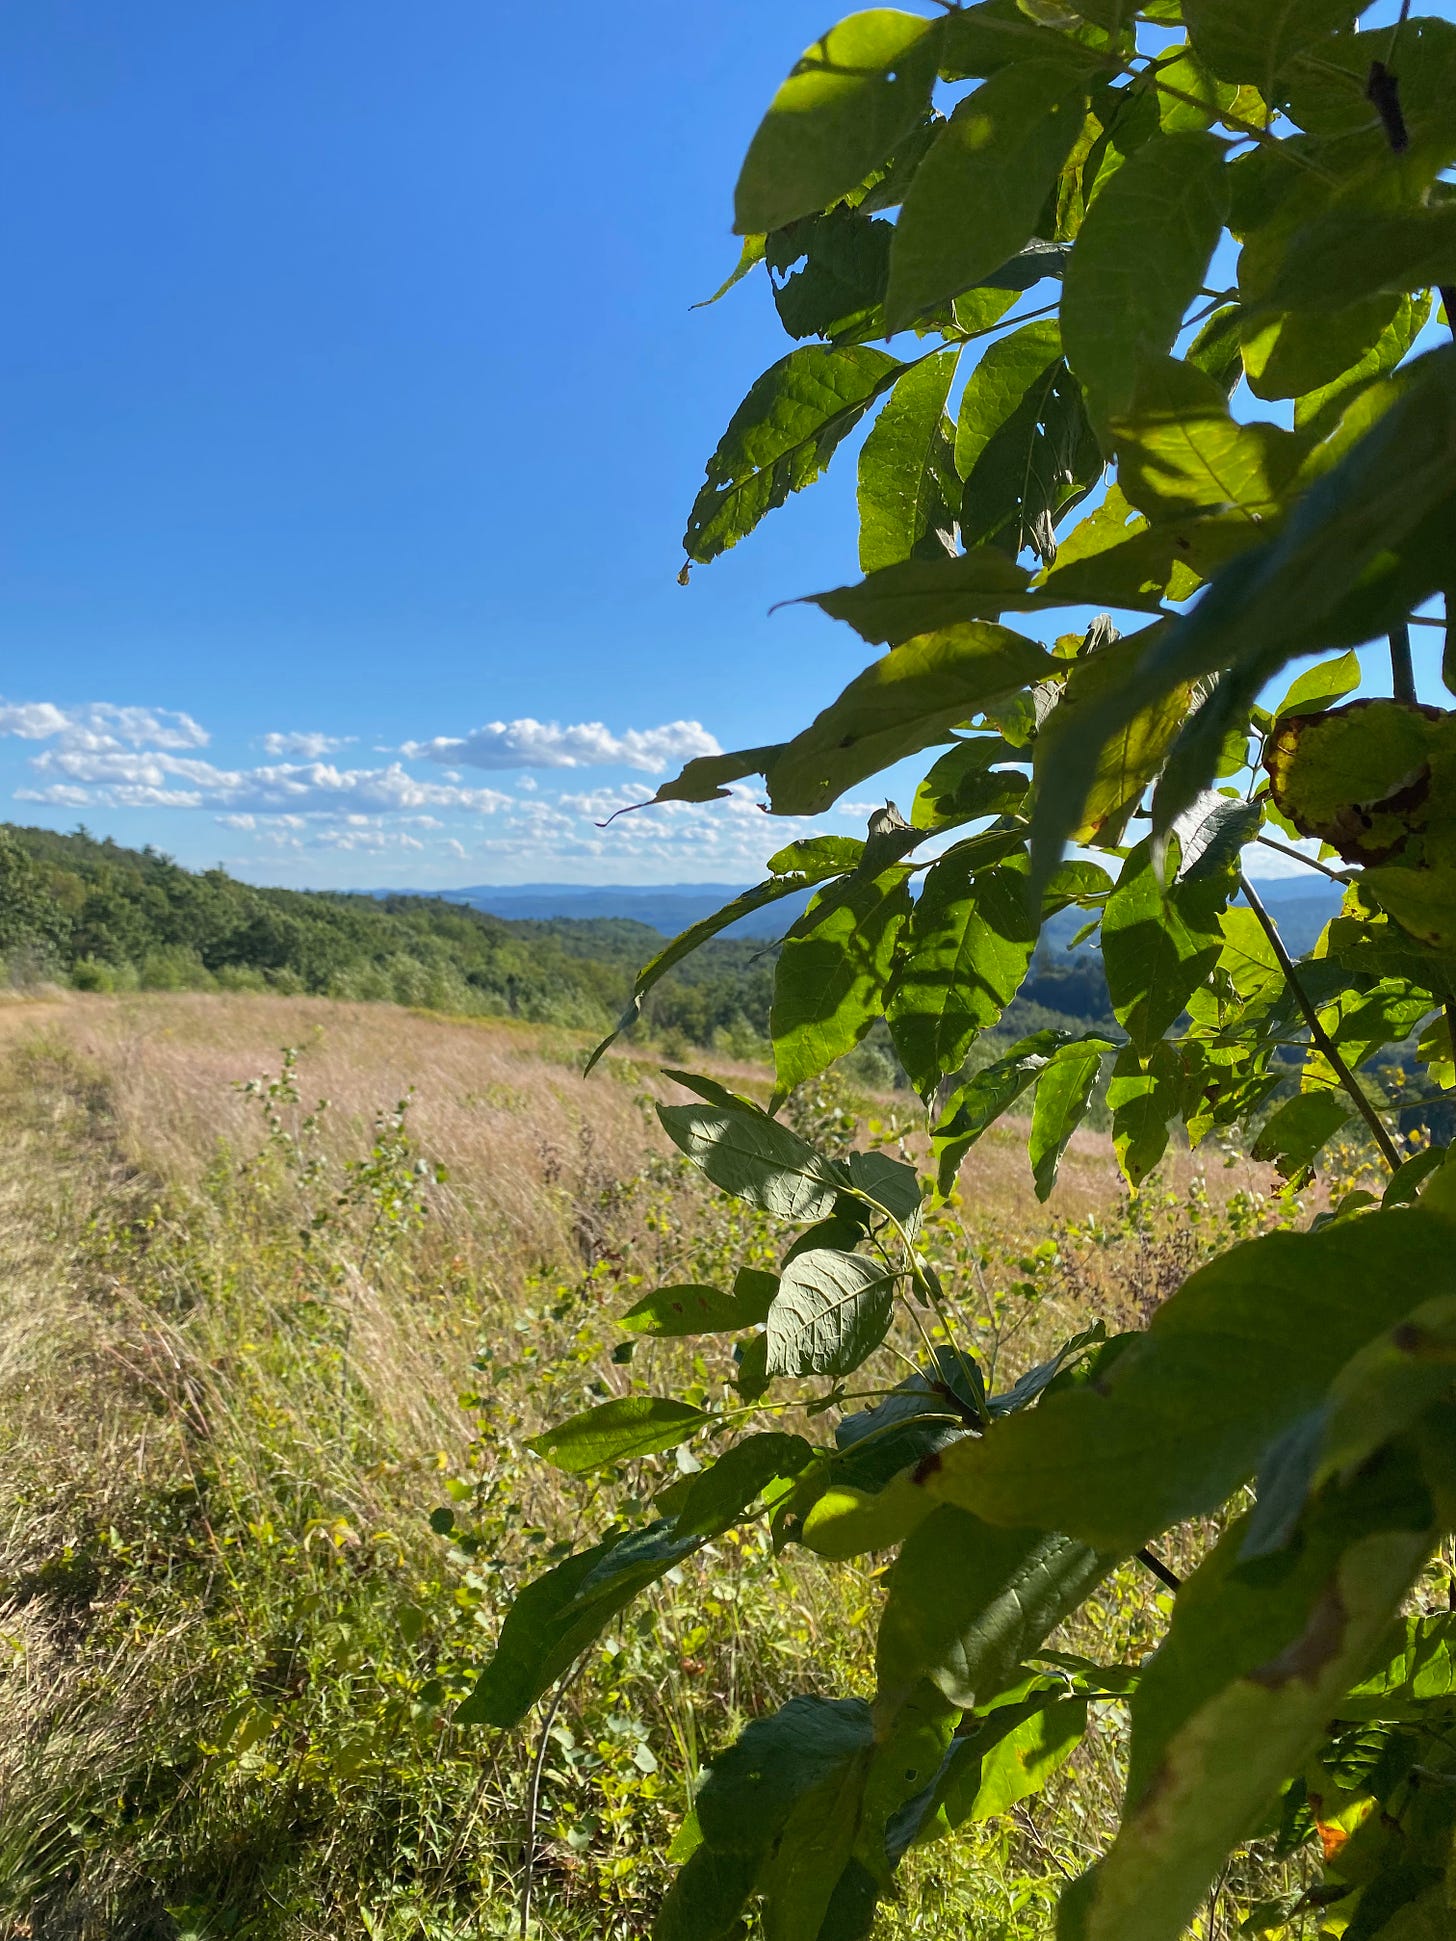 View of a windswept hilltop of brown grasses under a deep blue sky. In the foreground, a tree branch full of bright green leaves glinting in the sunlight.